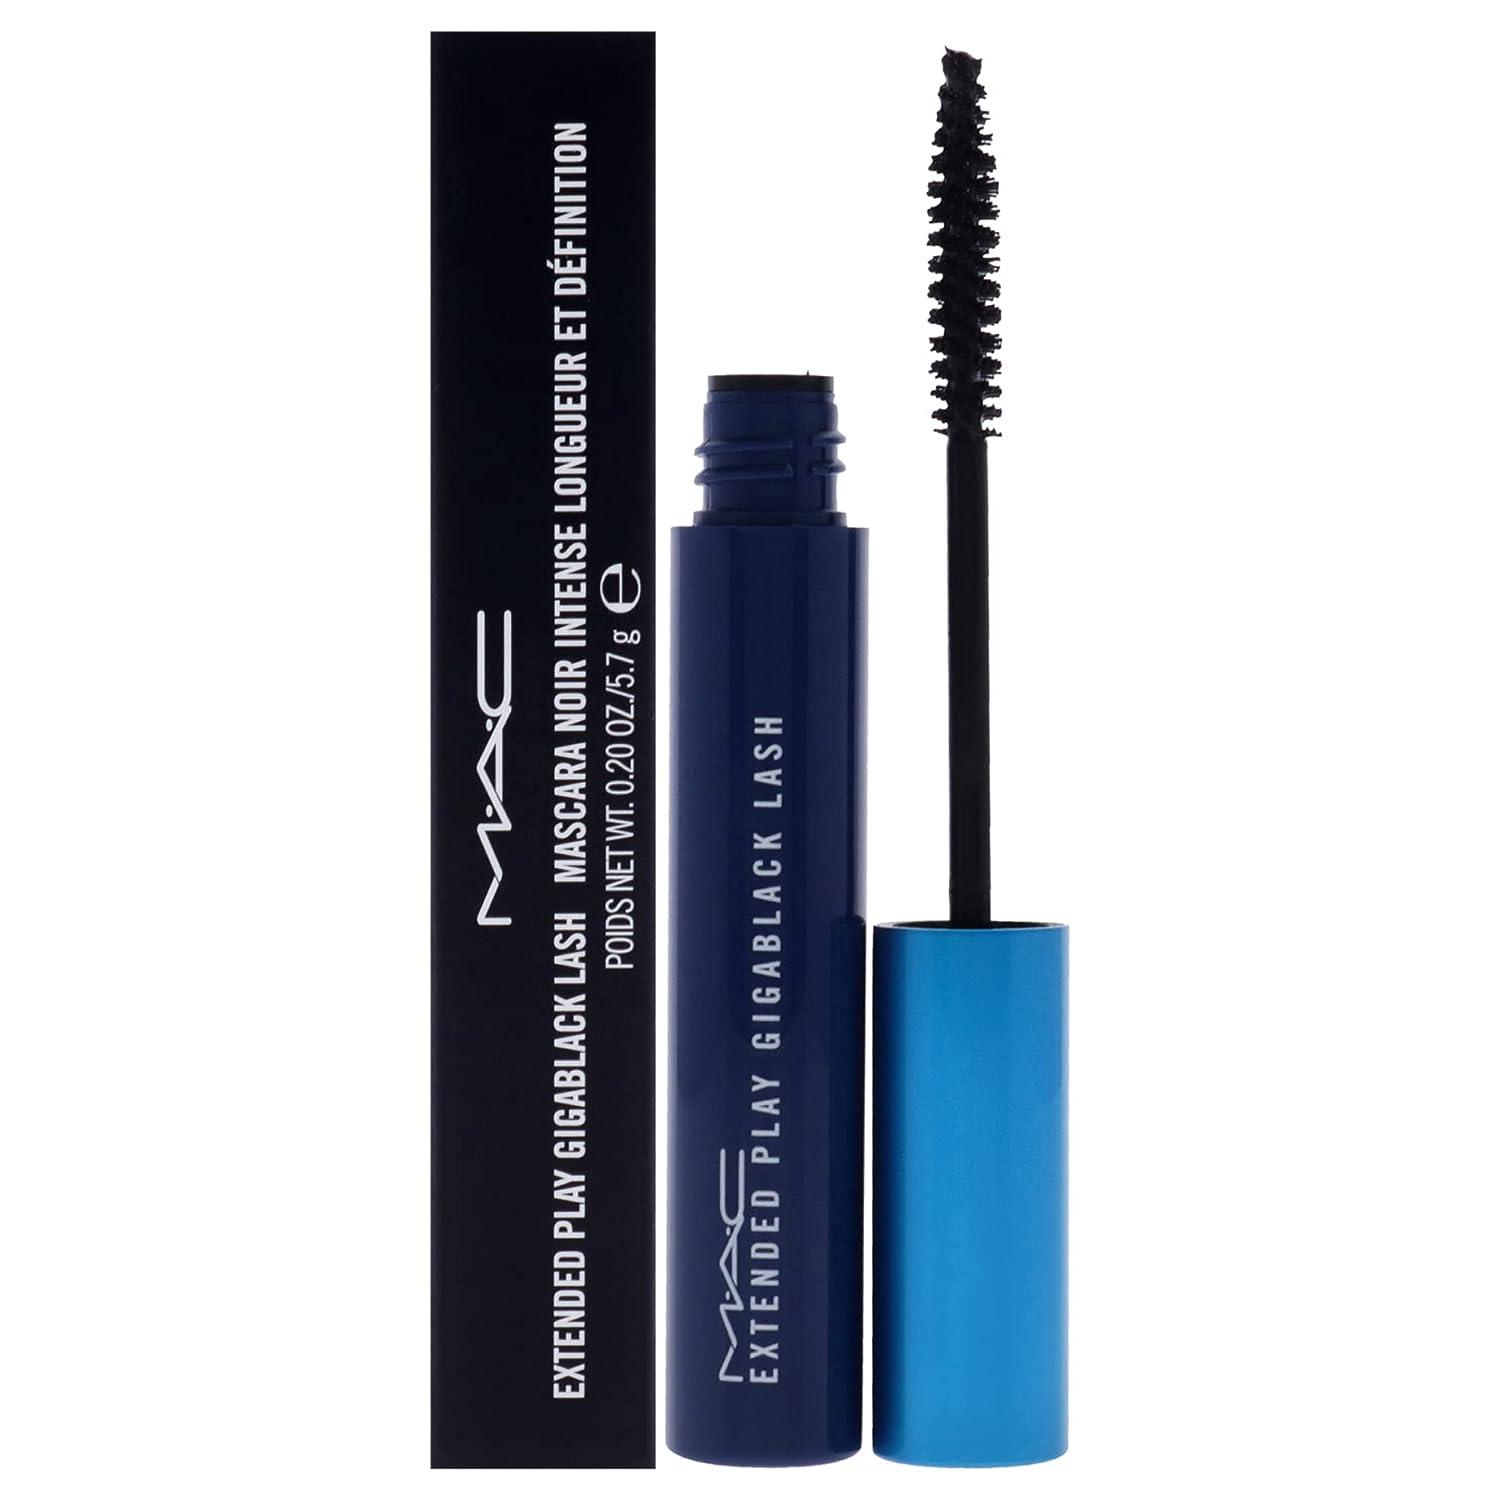 One of the best tubing mascara comes with the quantity and quality.